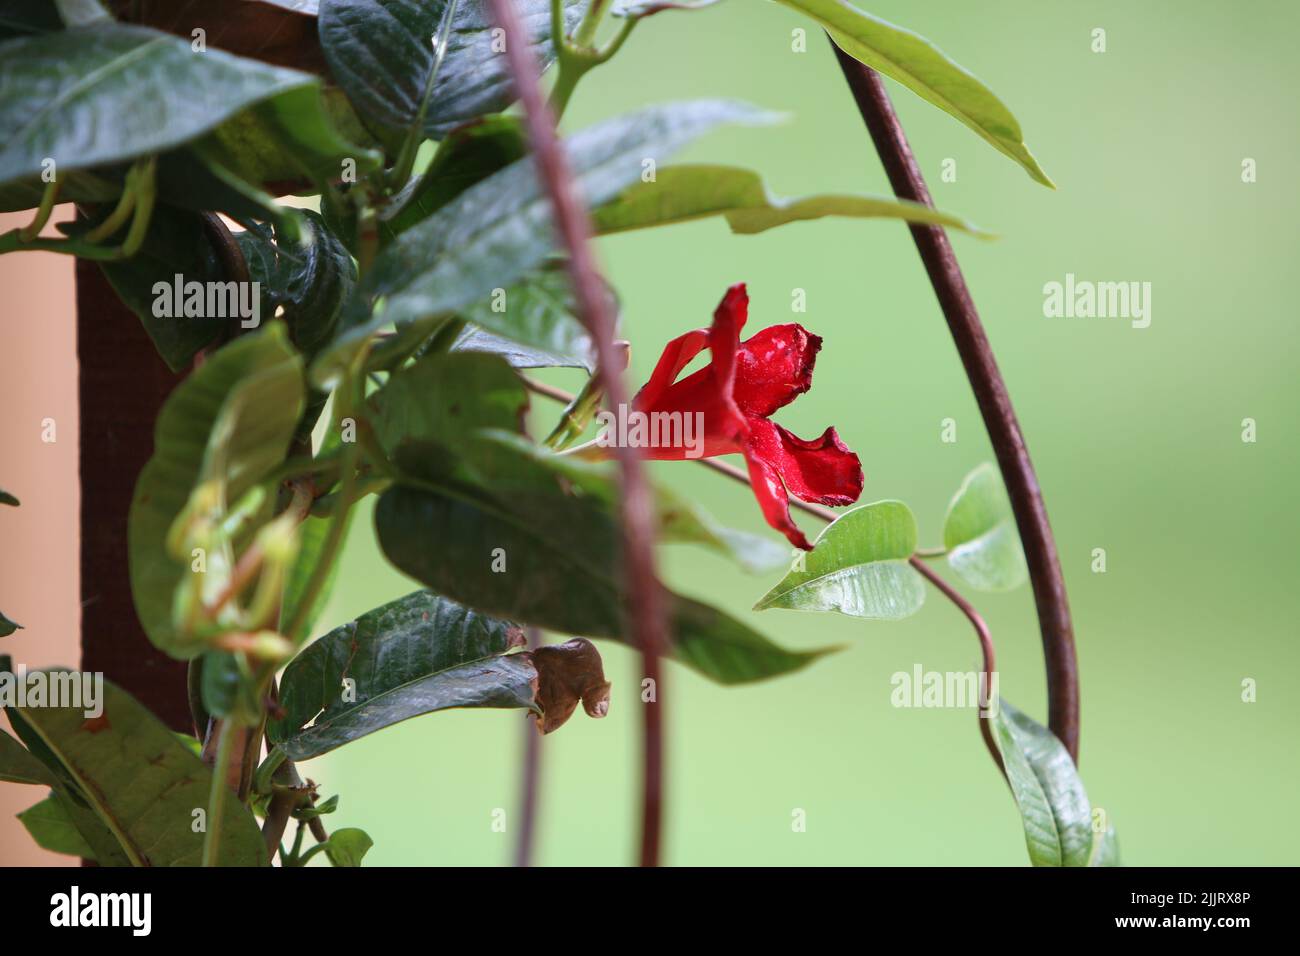 A closeup shot of a red flower blooming in the garden among green leaves on a sunny day with blurred background Stock Photo